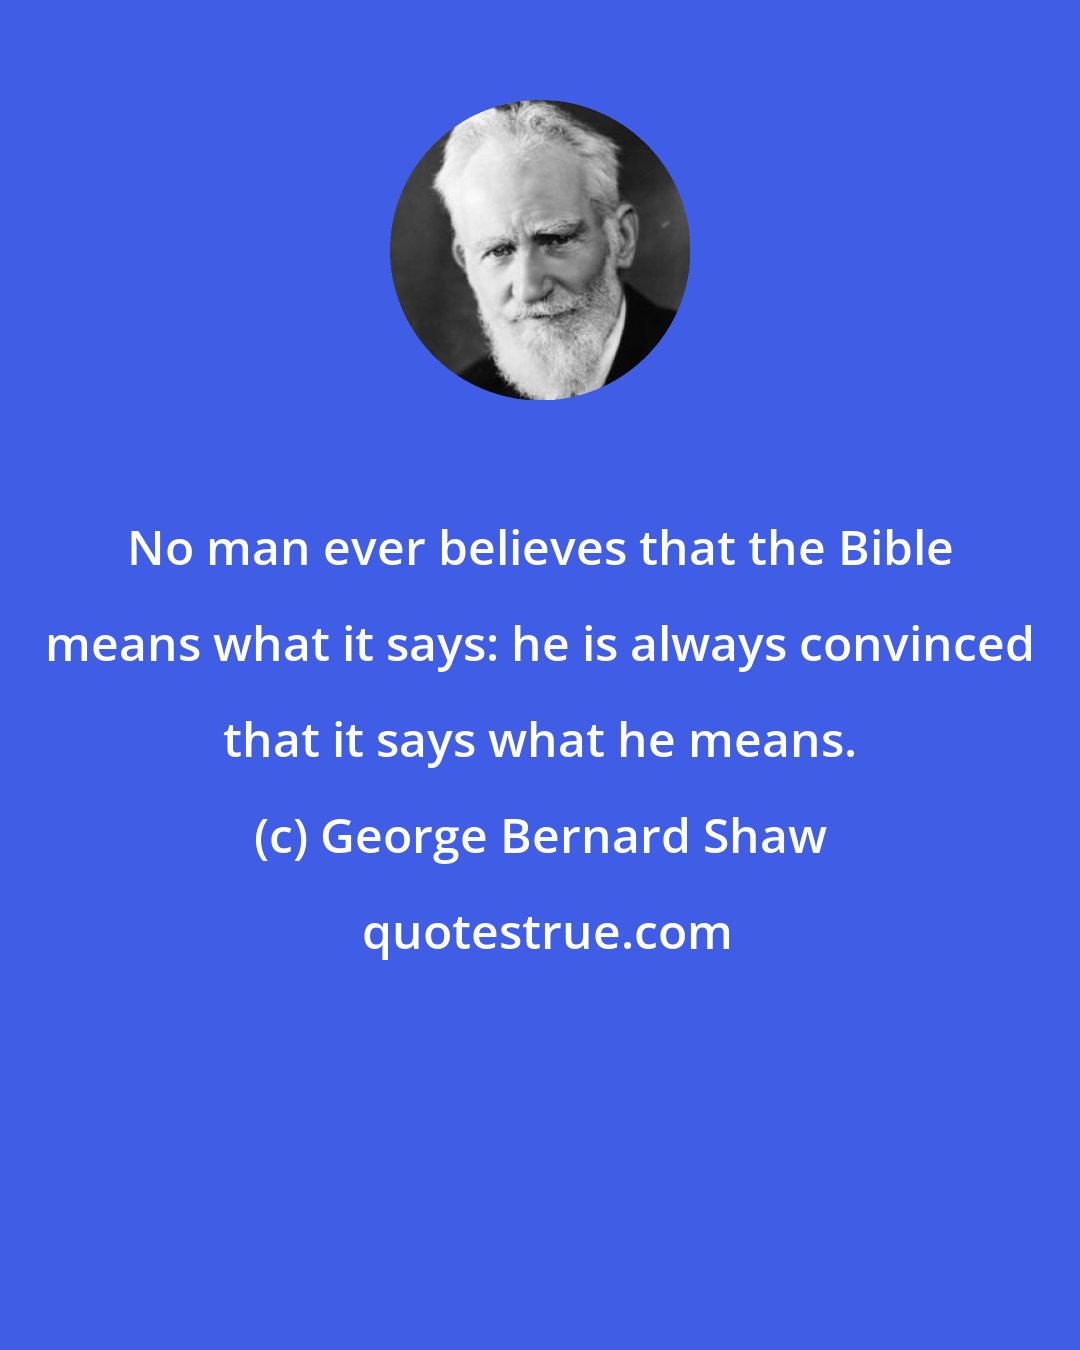 George Bernard Shaw: No man ever believes that the Bible means what it says: he is always convinced that it says what he means.